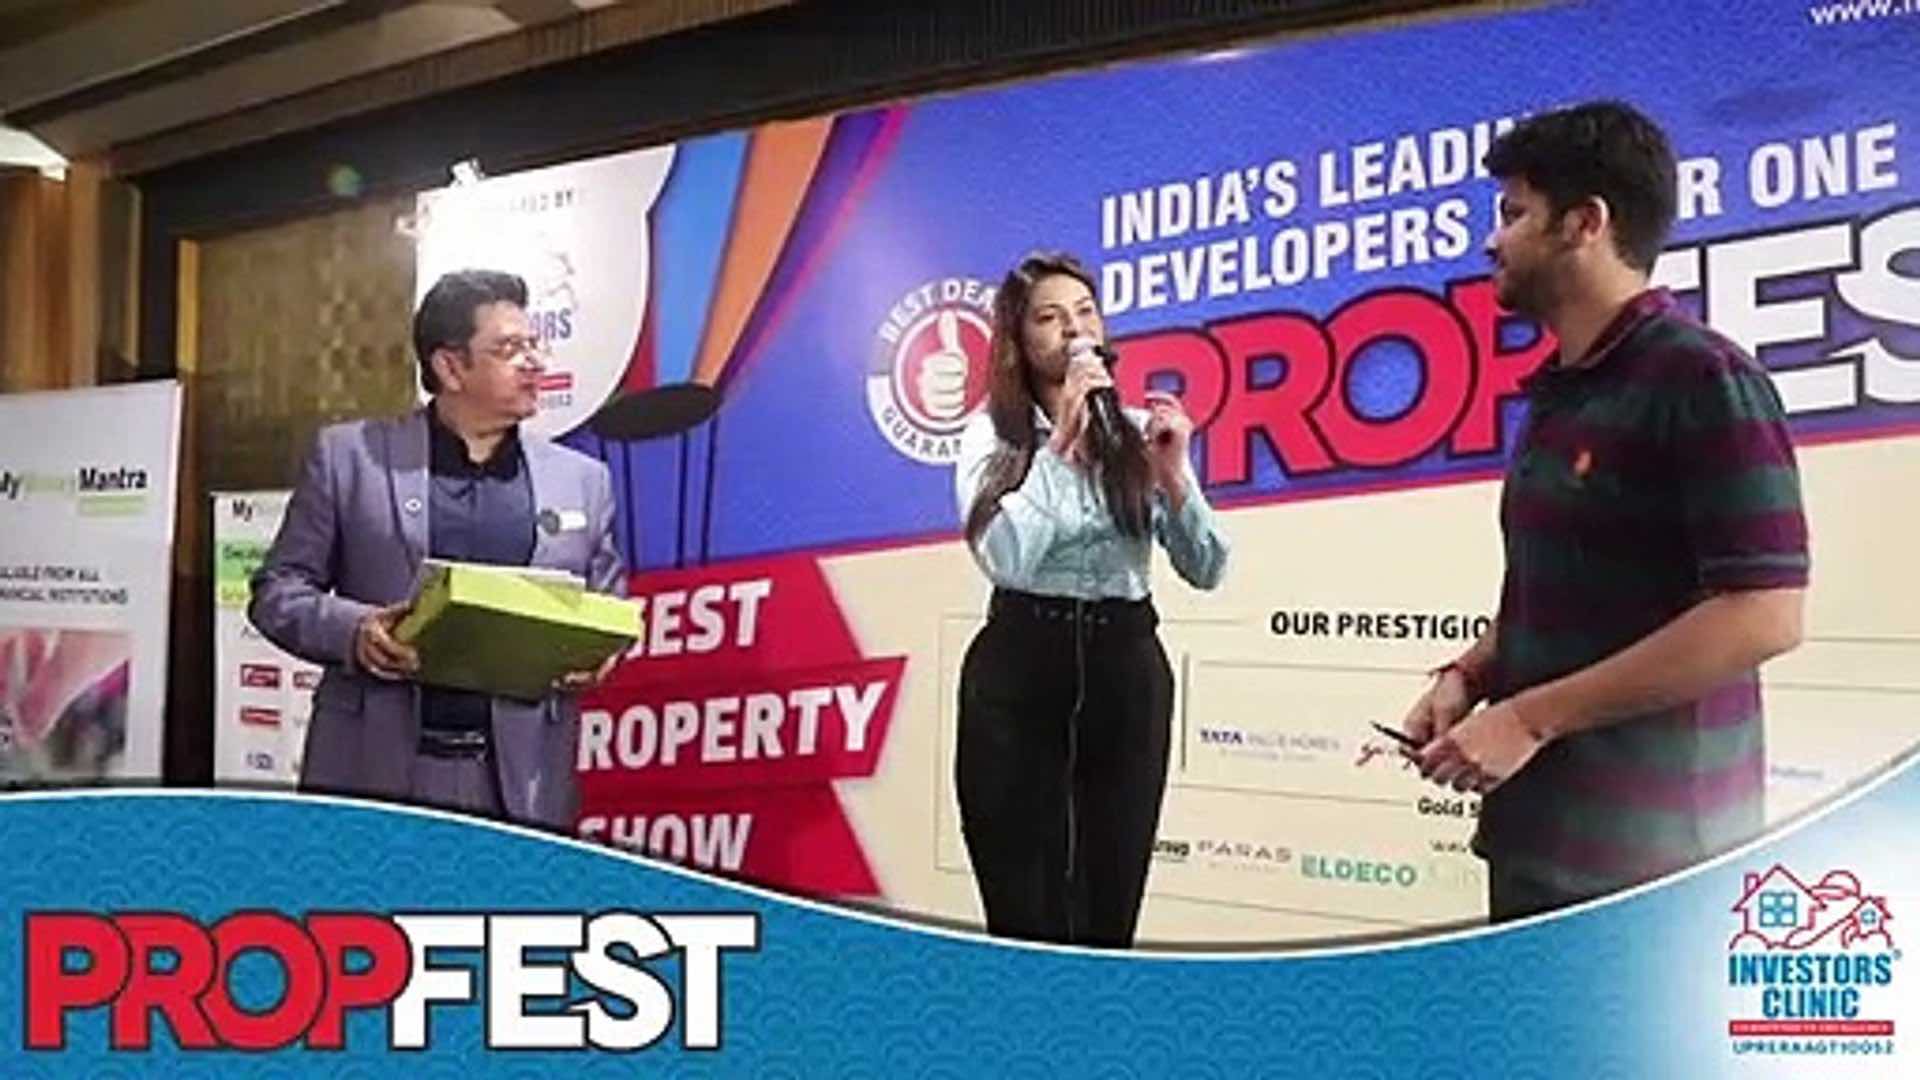 Investors Clinic to organize Propfest 2019 in Singapore post humongous success in Gurgaon and Noida Update